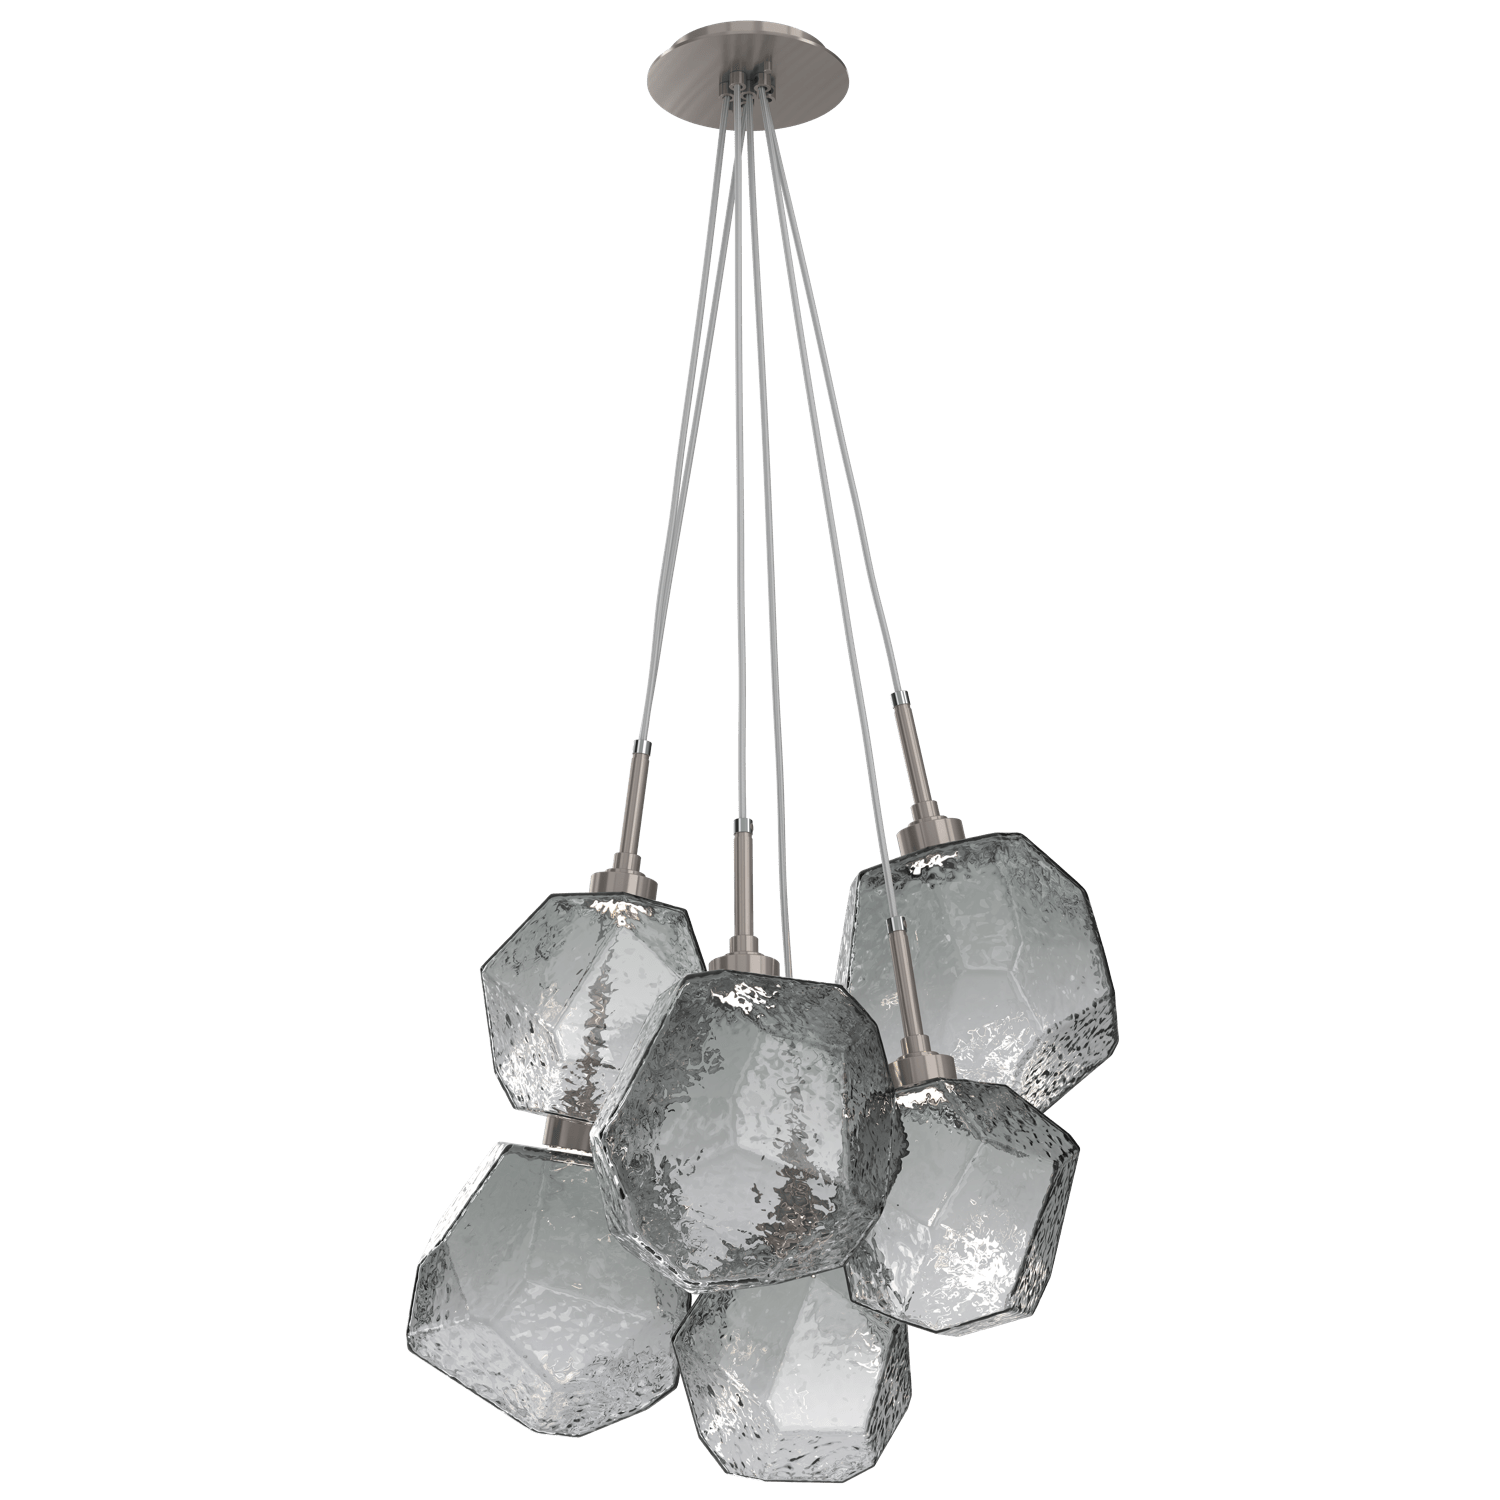 CHB0039-0F-GM-S-Hammerton-Studio-Gem-6-light-cluster-pendant-light-with-gunmetal-finish-and-smoke-blown-glass-shades-and-LED-lamping